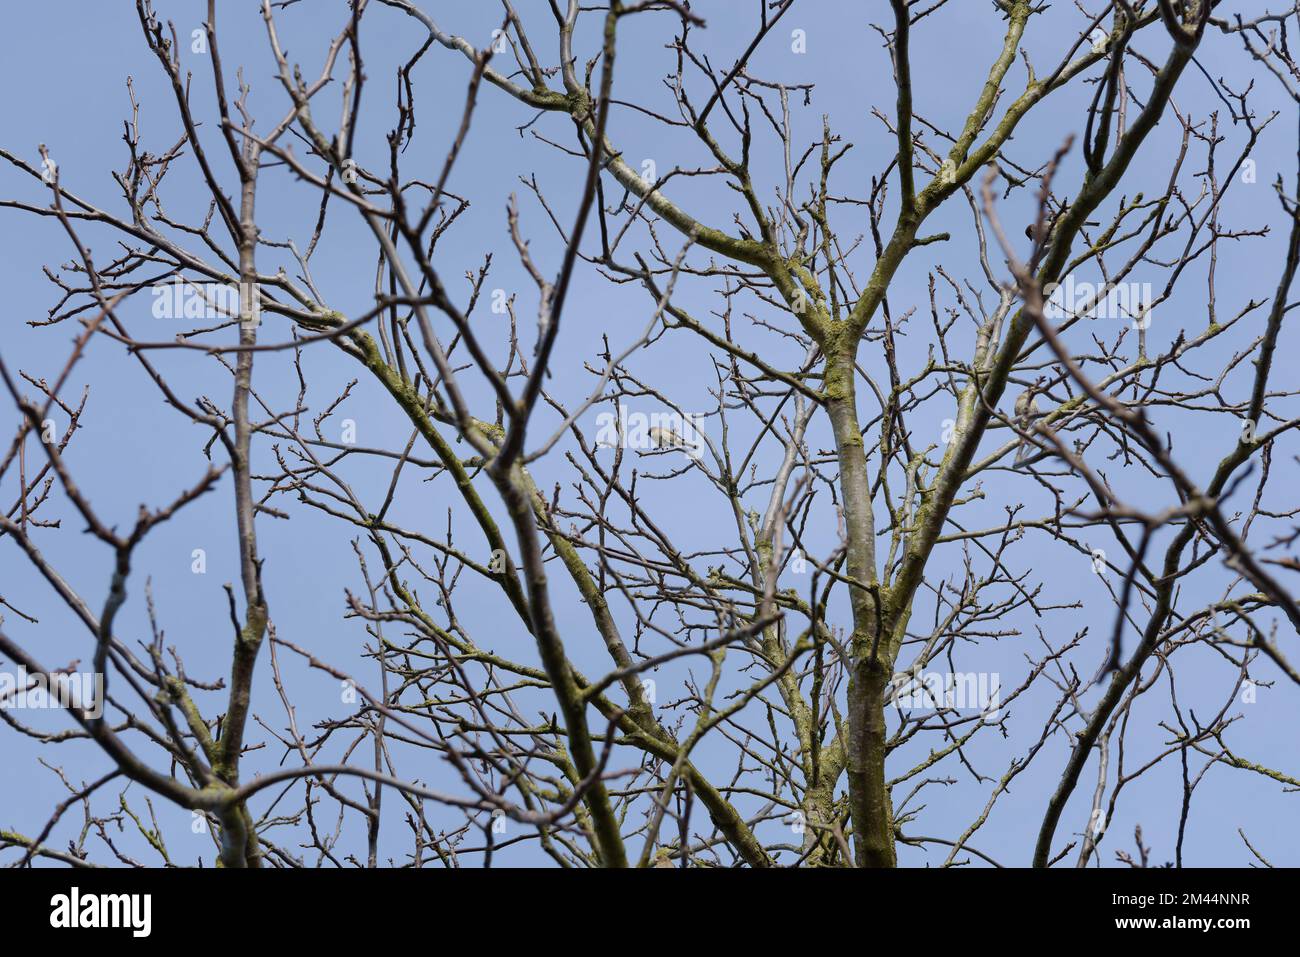 A small bird in the center of the frame among the branches of a winter tree without foliage Stock Photo